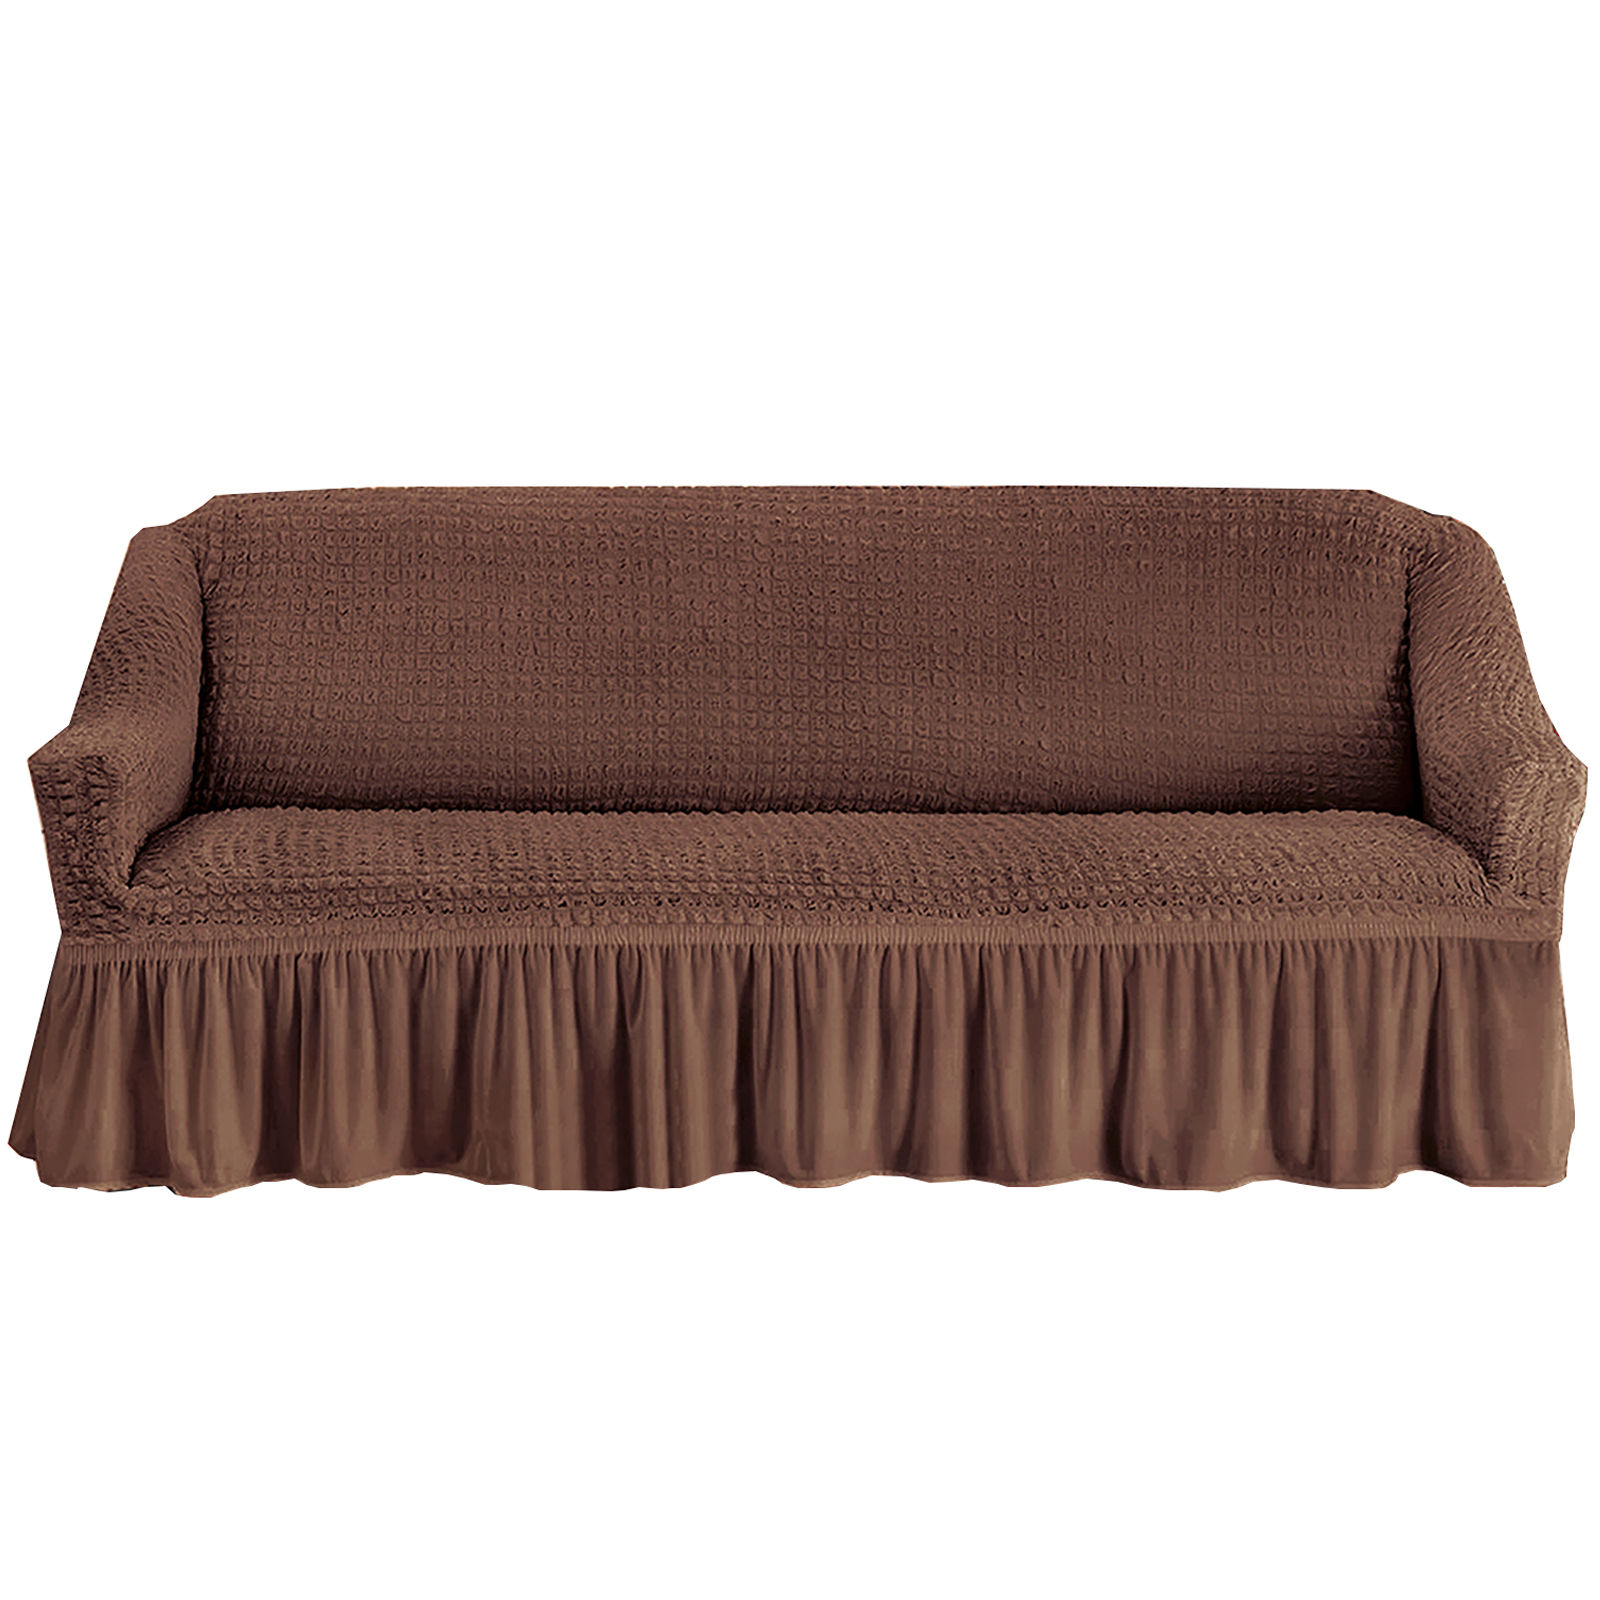 Stretch Sofa Slipcover, 3 Seater Sofa Slipcovers With Skirt With Armless Soft Sofa Cover Elastic Straps Sofa Slipcover For Living Room Kids Pets-Brown B-Large